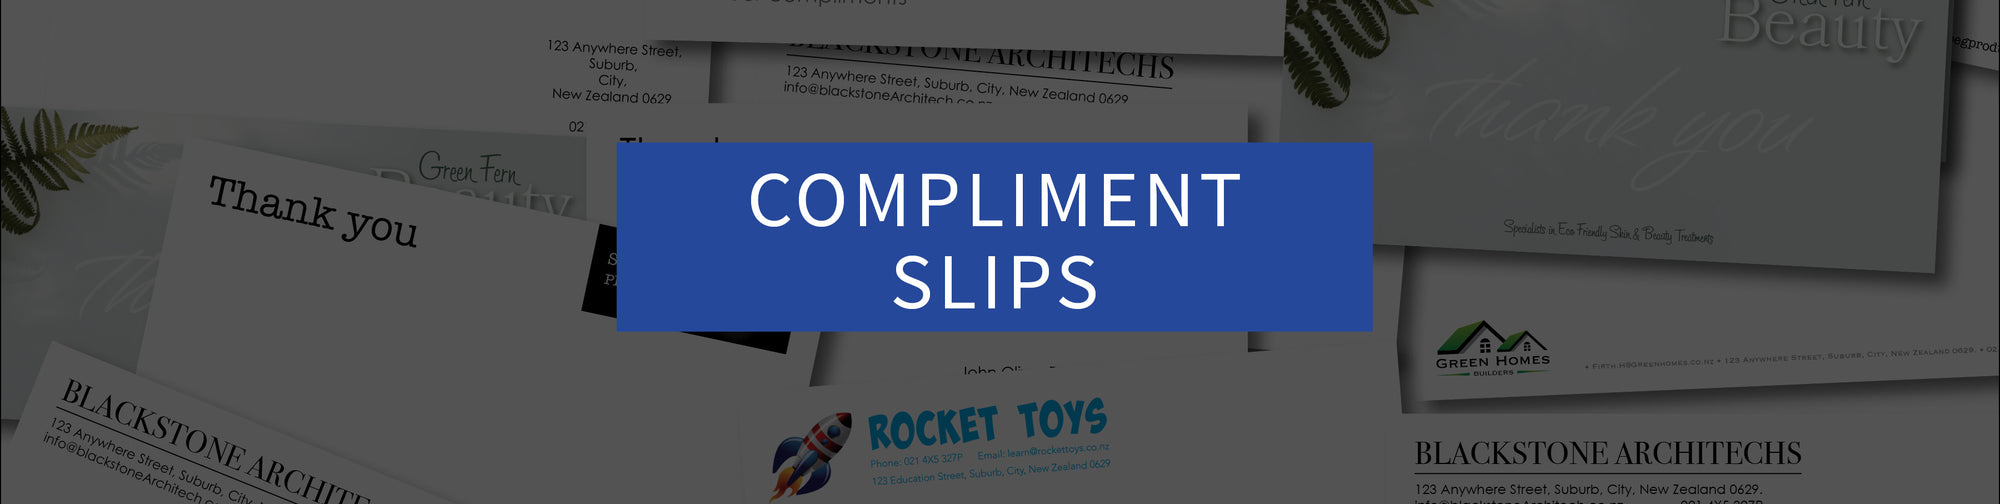 Compliment slips